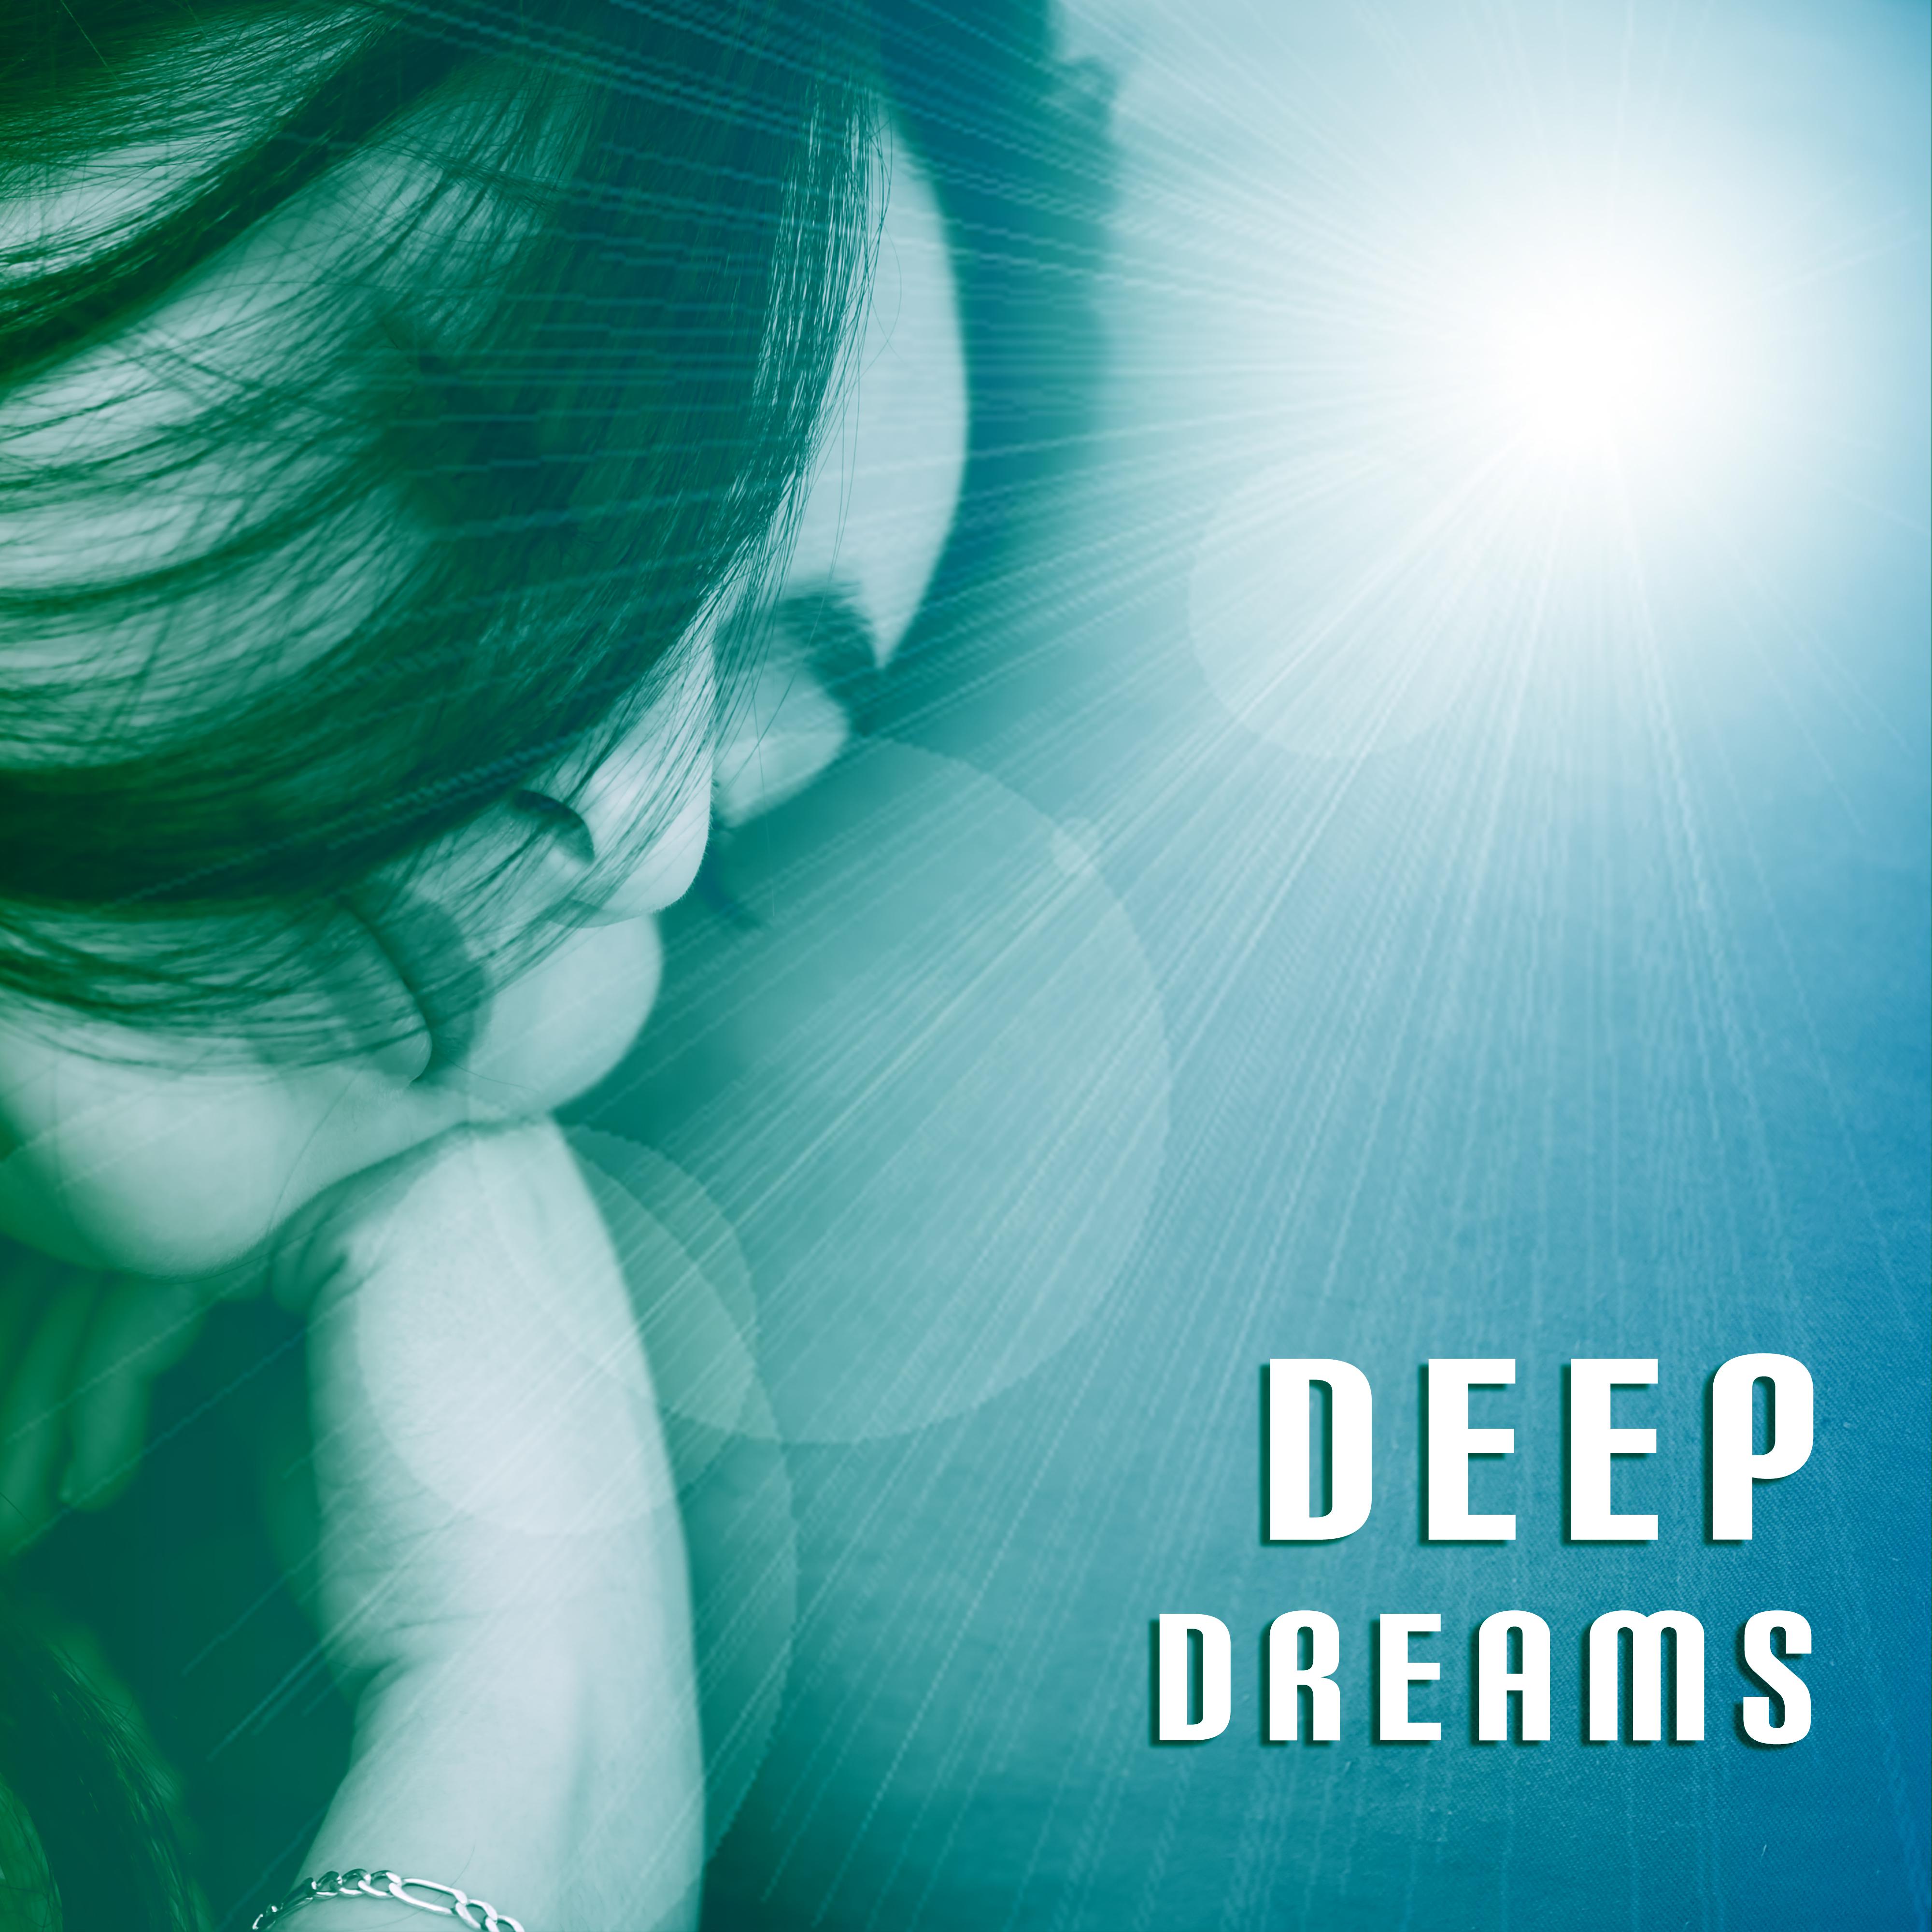 Deep Dreams  Soft Music for Sleep, Peaceful Sounds, Calm Lullaby, Stress Relief, Bedtime, New Age